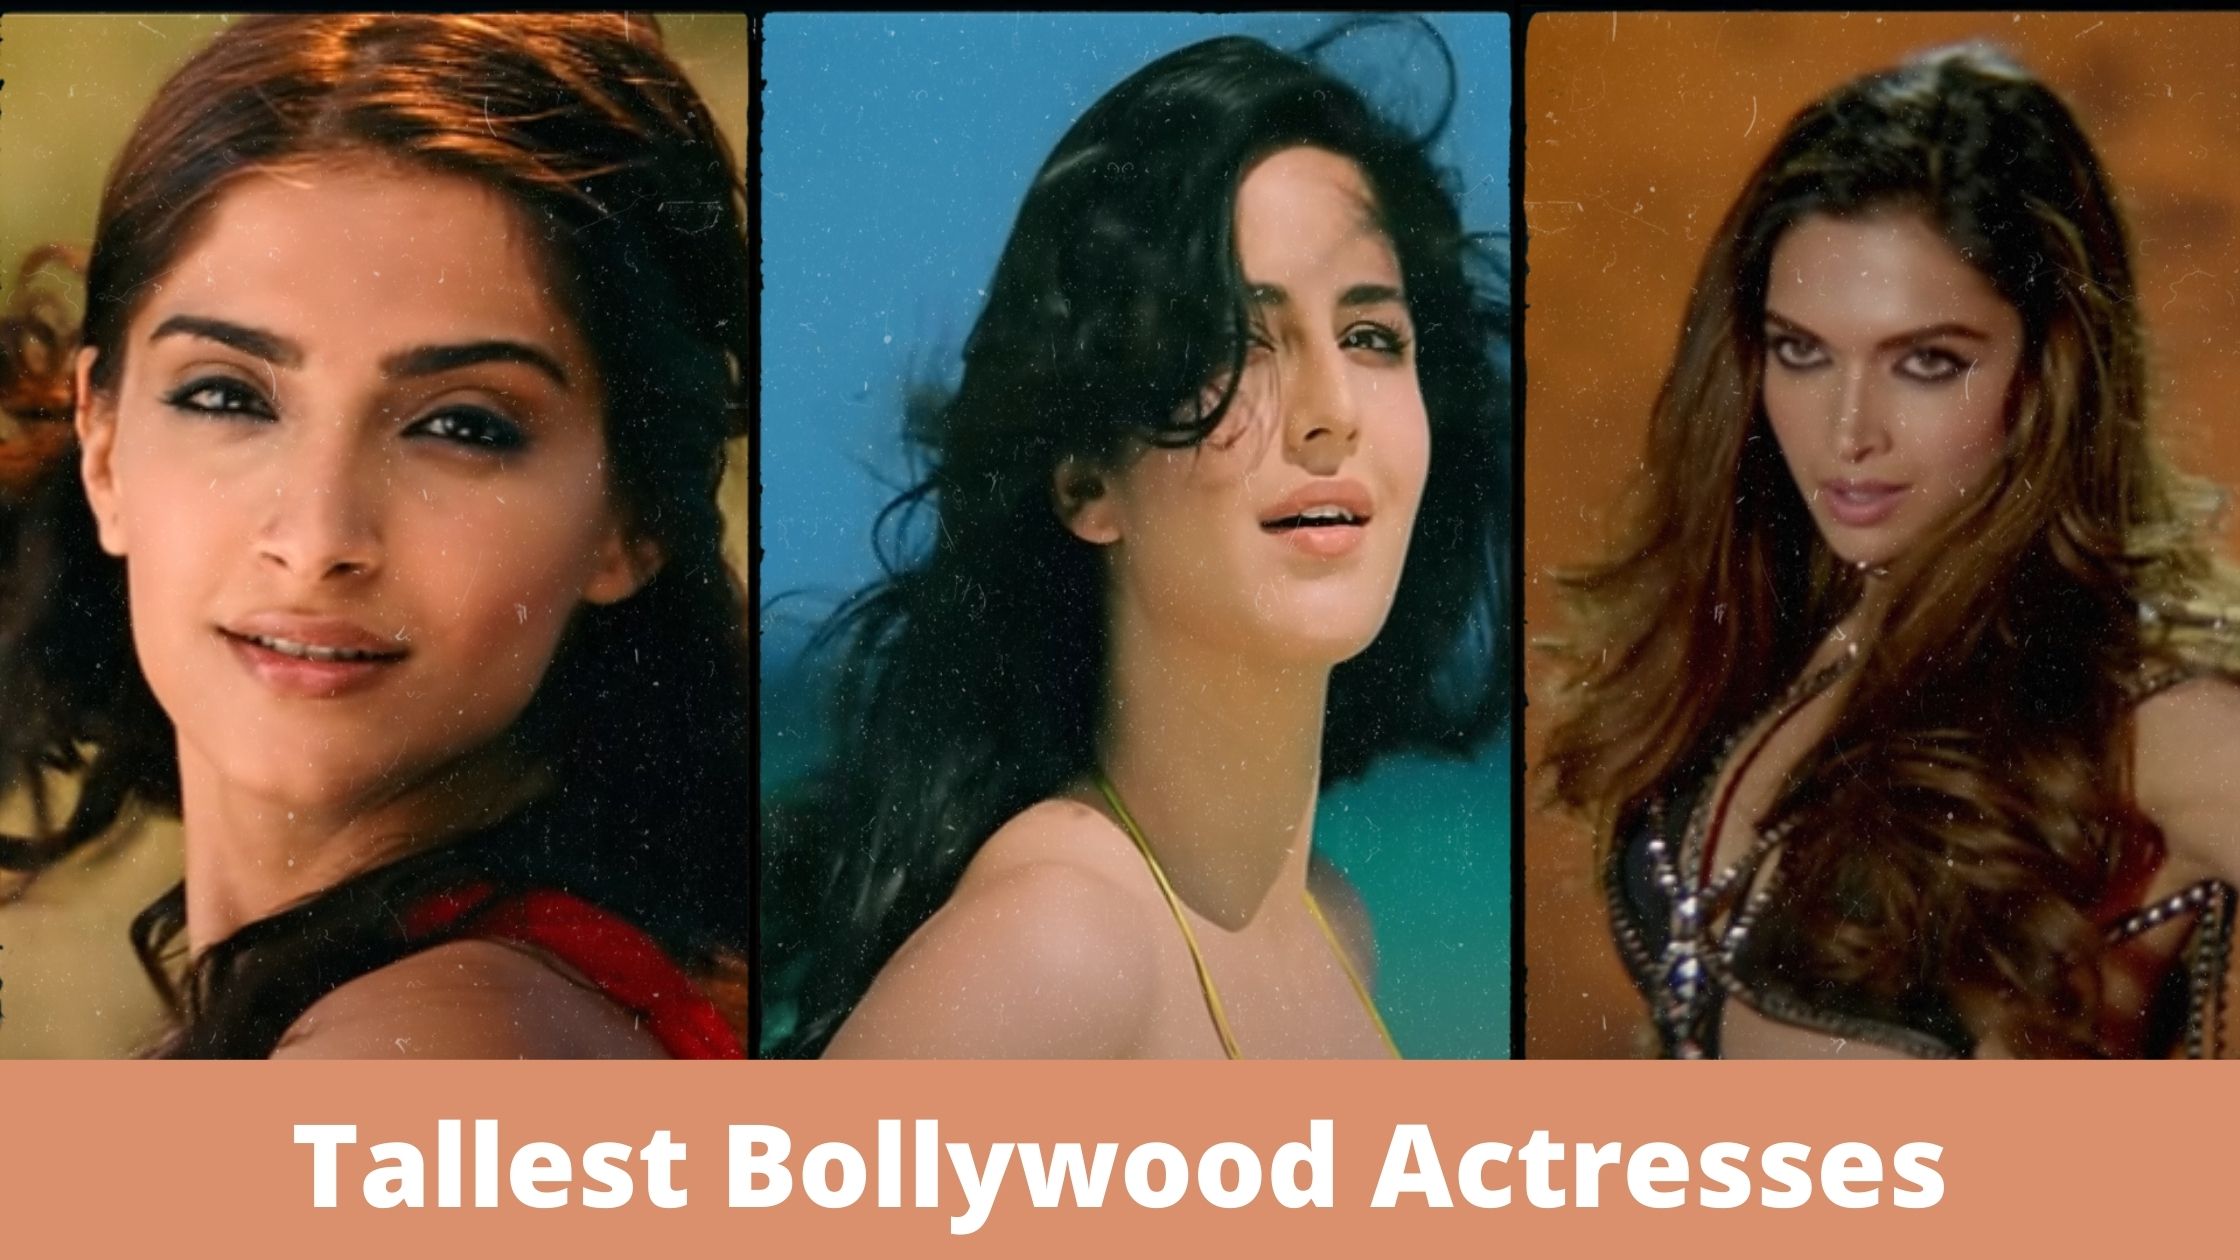 Tallest Bollywood actresses